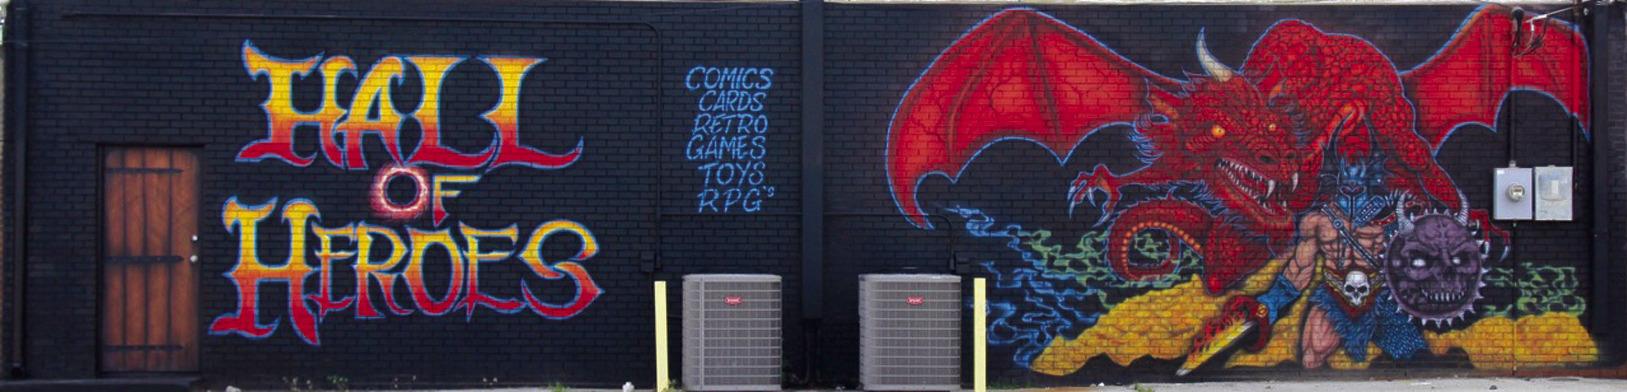 HALL OF Heroes, located at 112 N 1st Street, now has a mural of the Red Dragon and the warrior, Warduke, from Dungeons and Dragons. Painted by artist Todd Alexander, the mural is on the back side of the Hall of Heroes building. (Photo by Dailyn Emery)